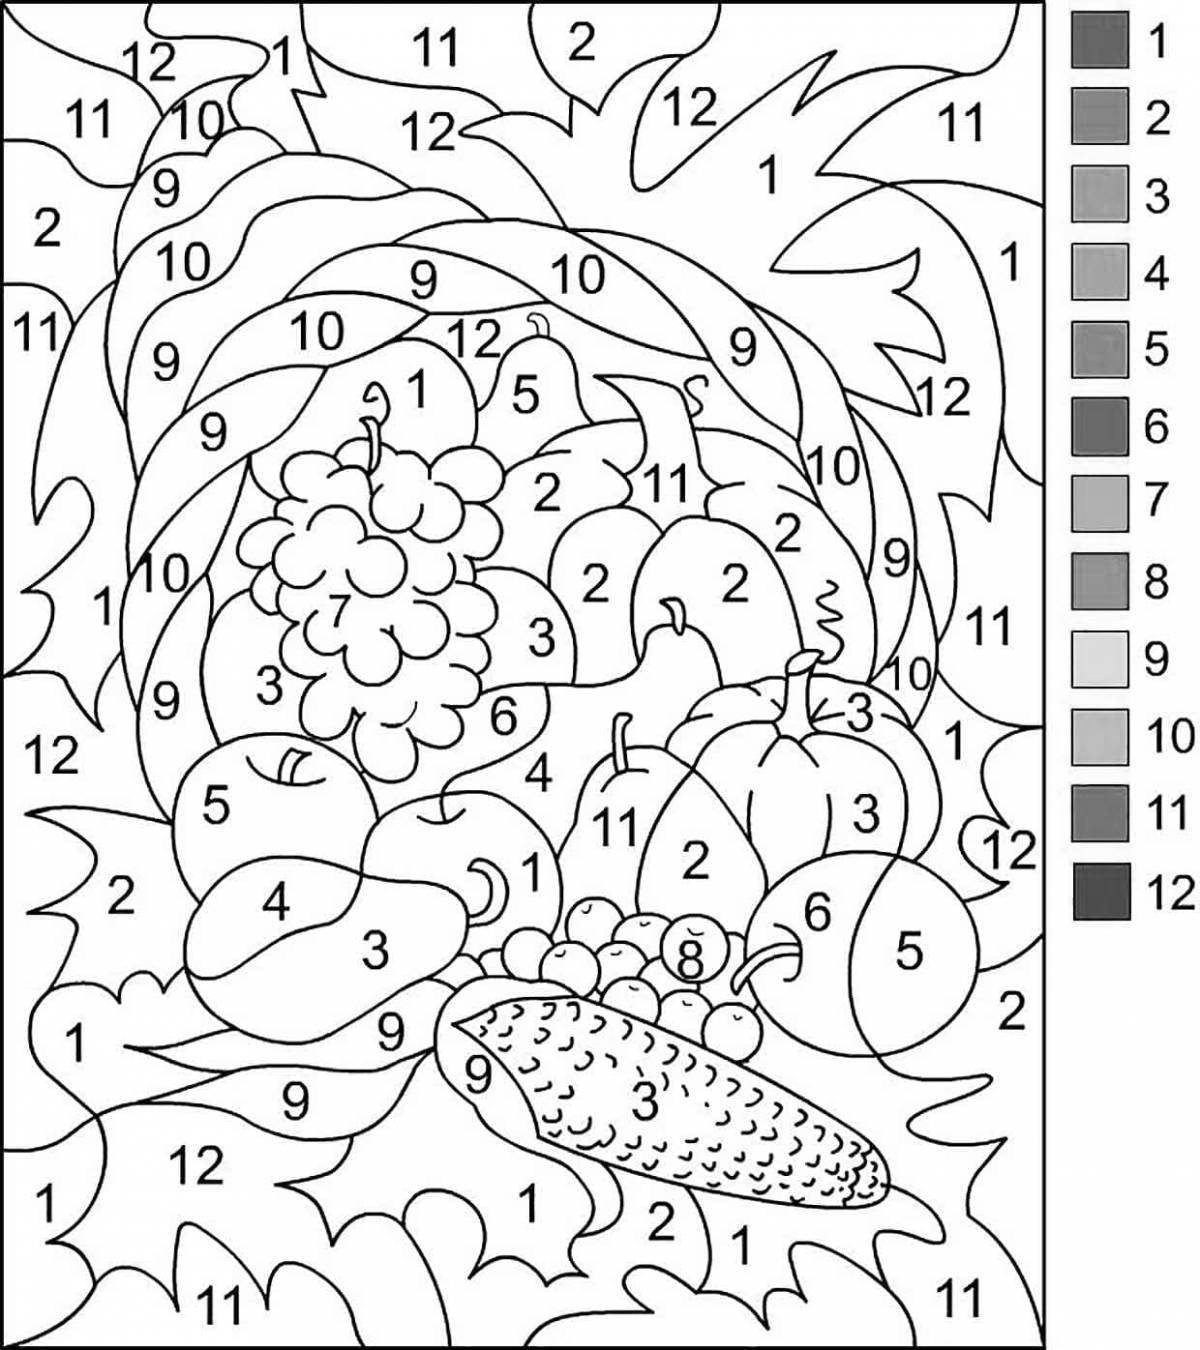 Cute coloring easy-by-numbers